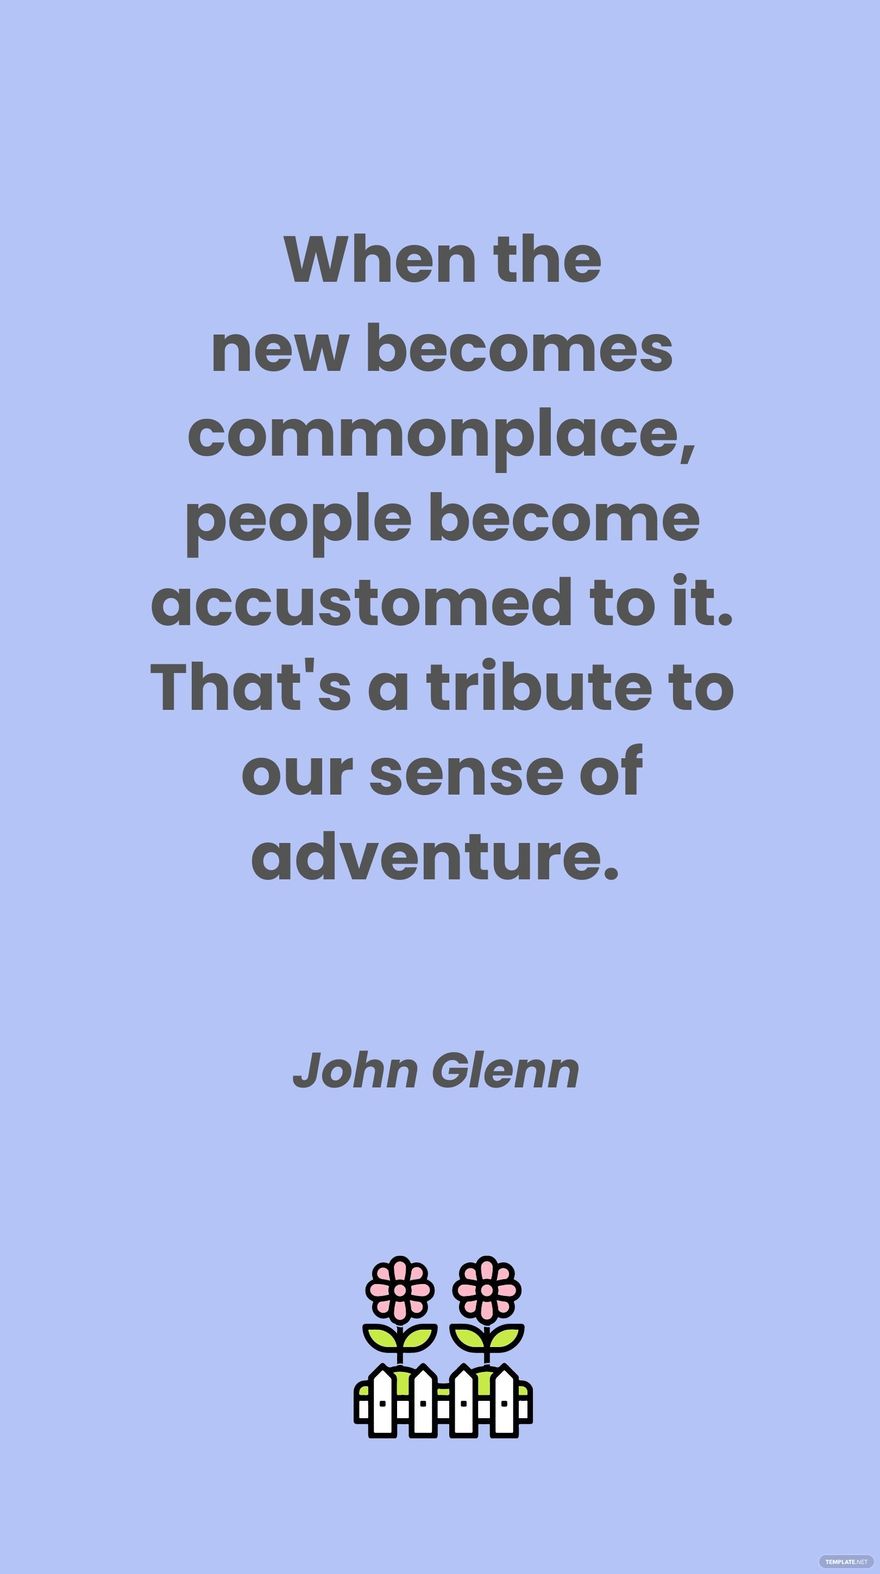 John Glenn - When the new becomes commonplace, people become accustomed to it. That's a tribute to our sense of adventure.